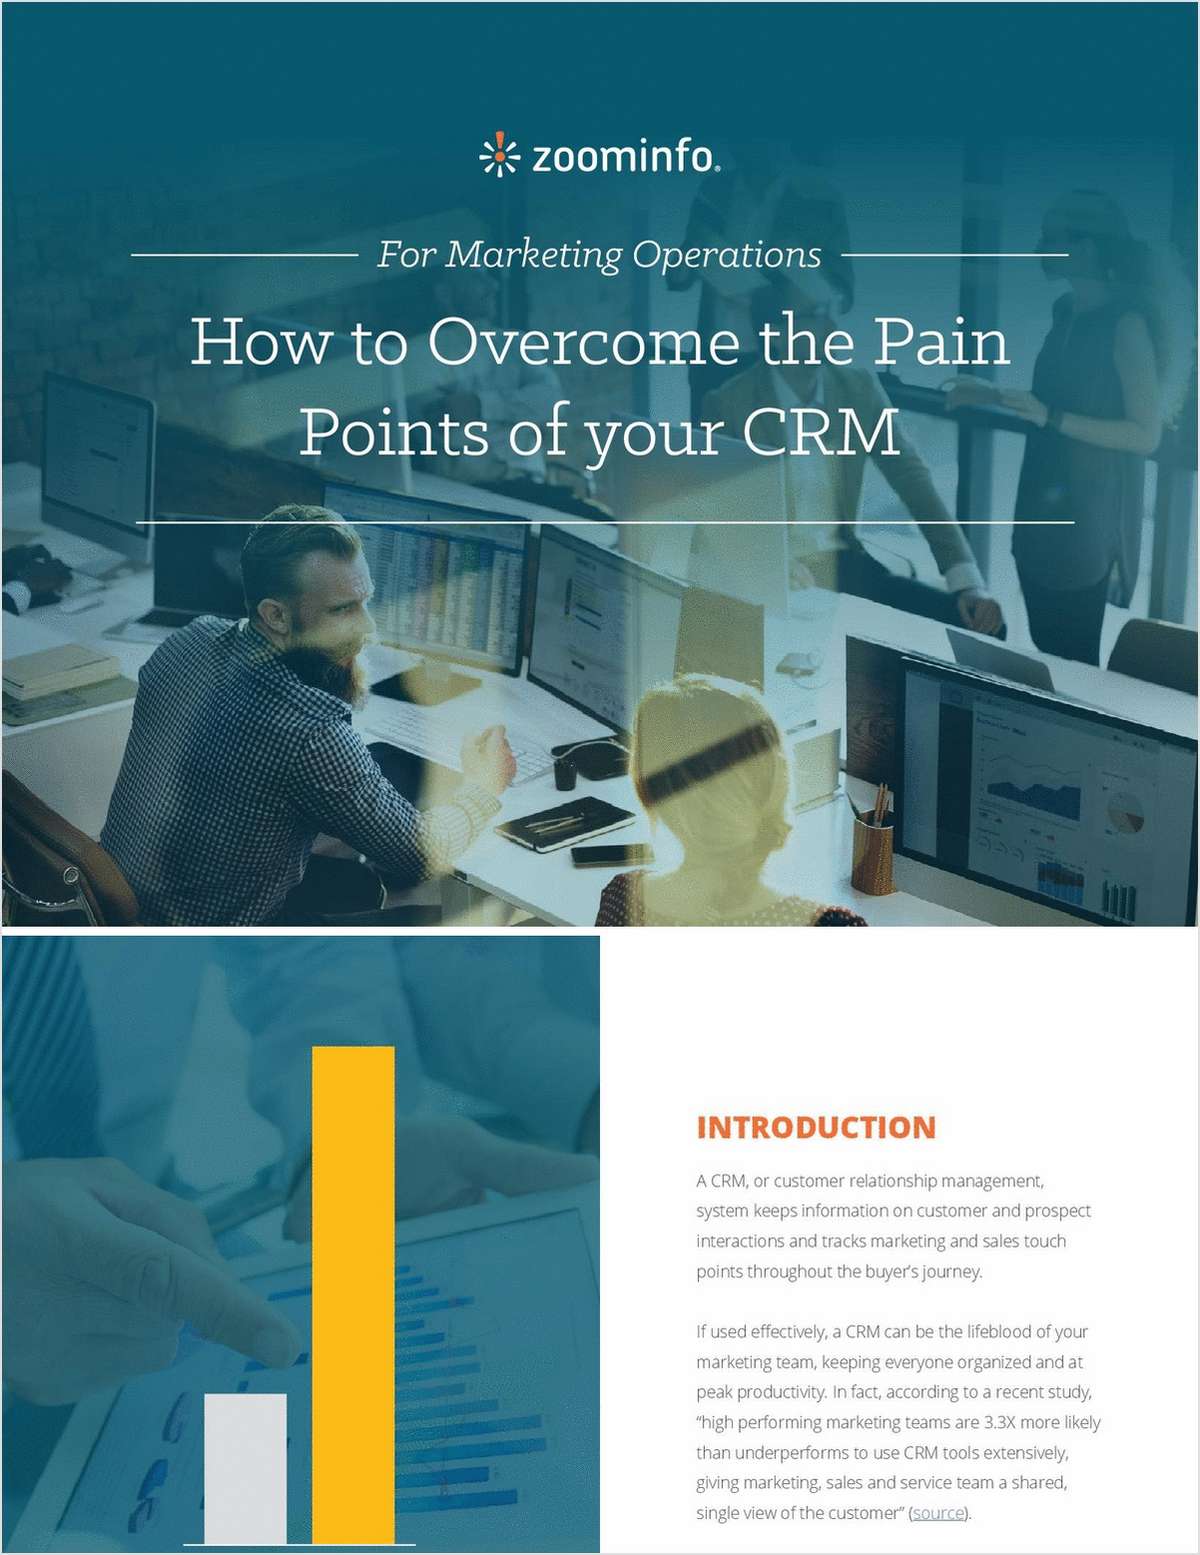 How To Overcome The Pain Points Of Your CRM